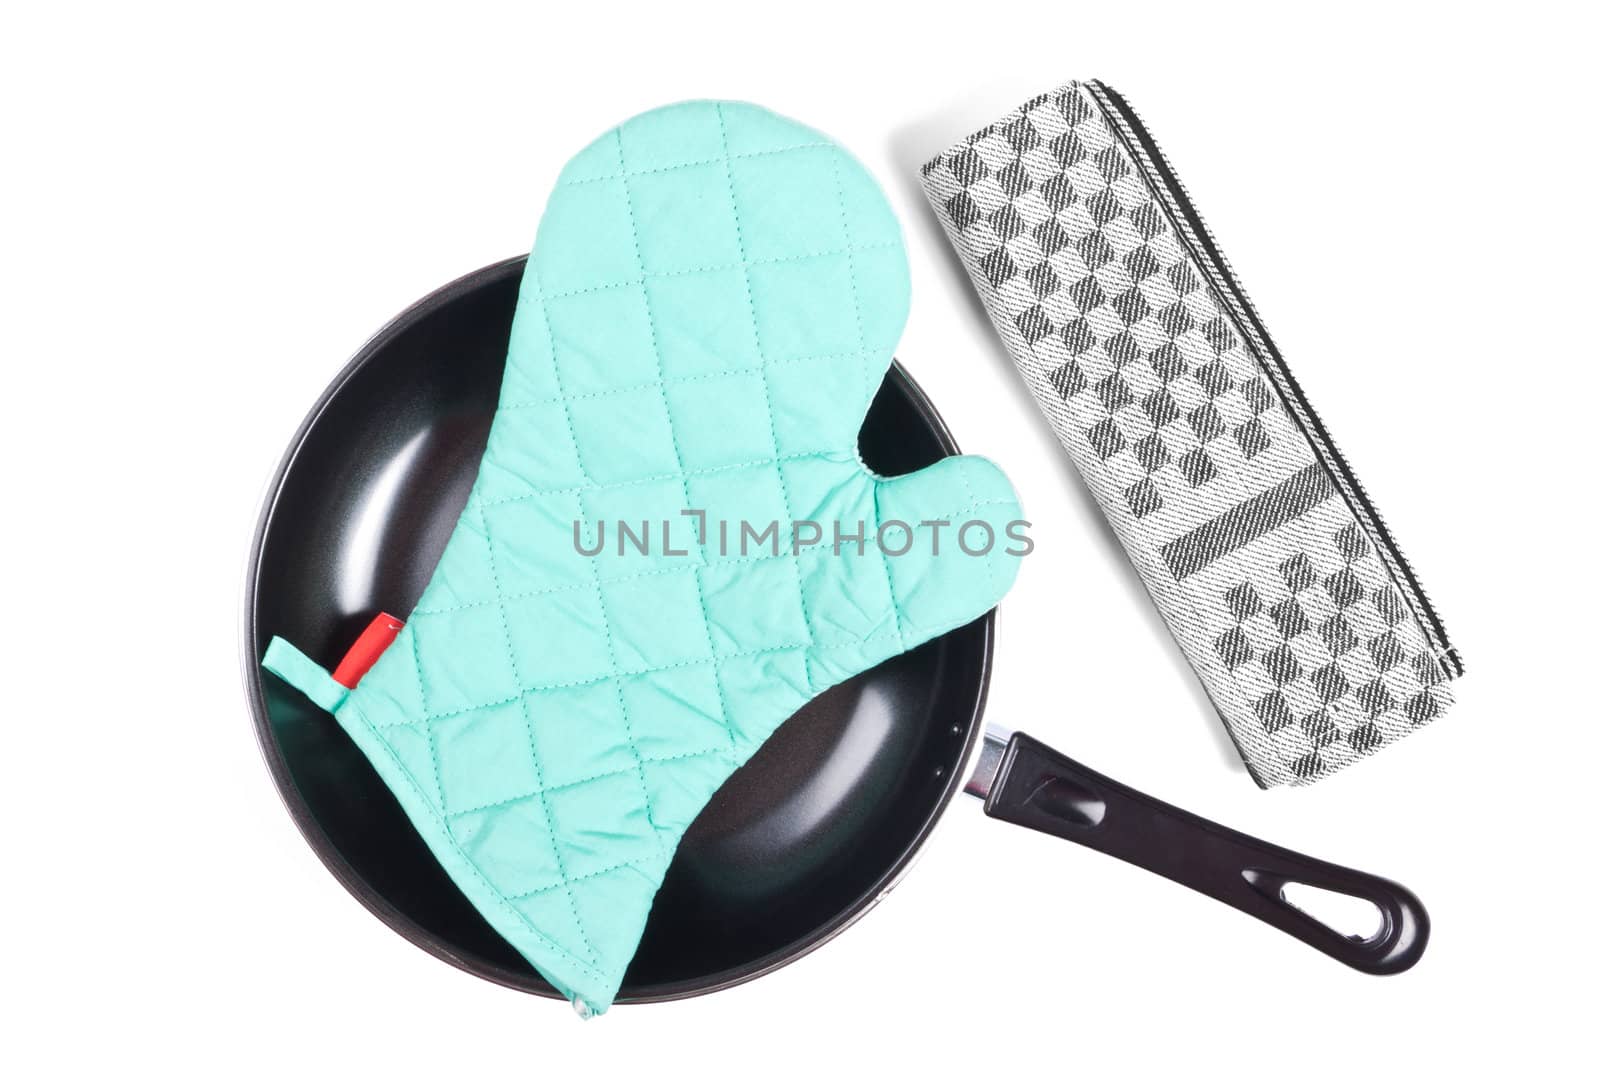 Kitchen glove in pan with grater isolaetd on white